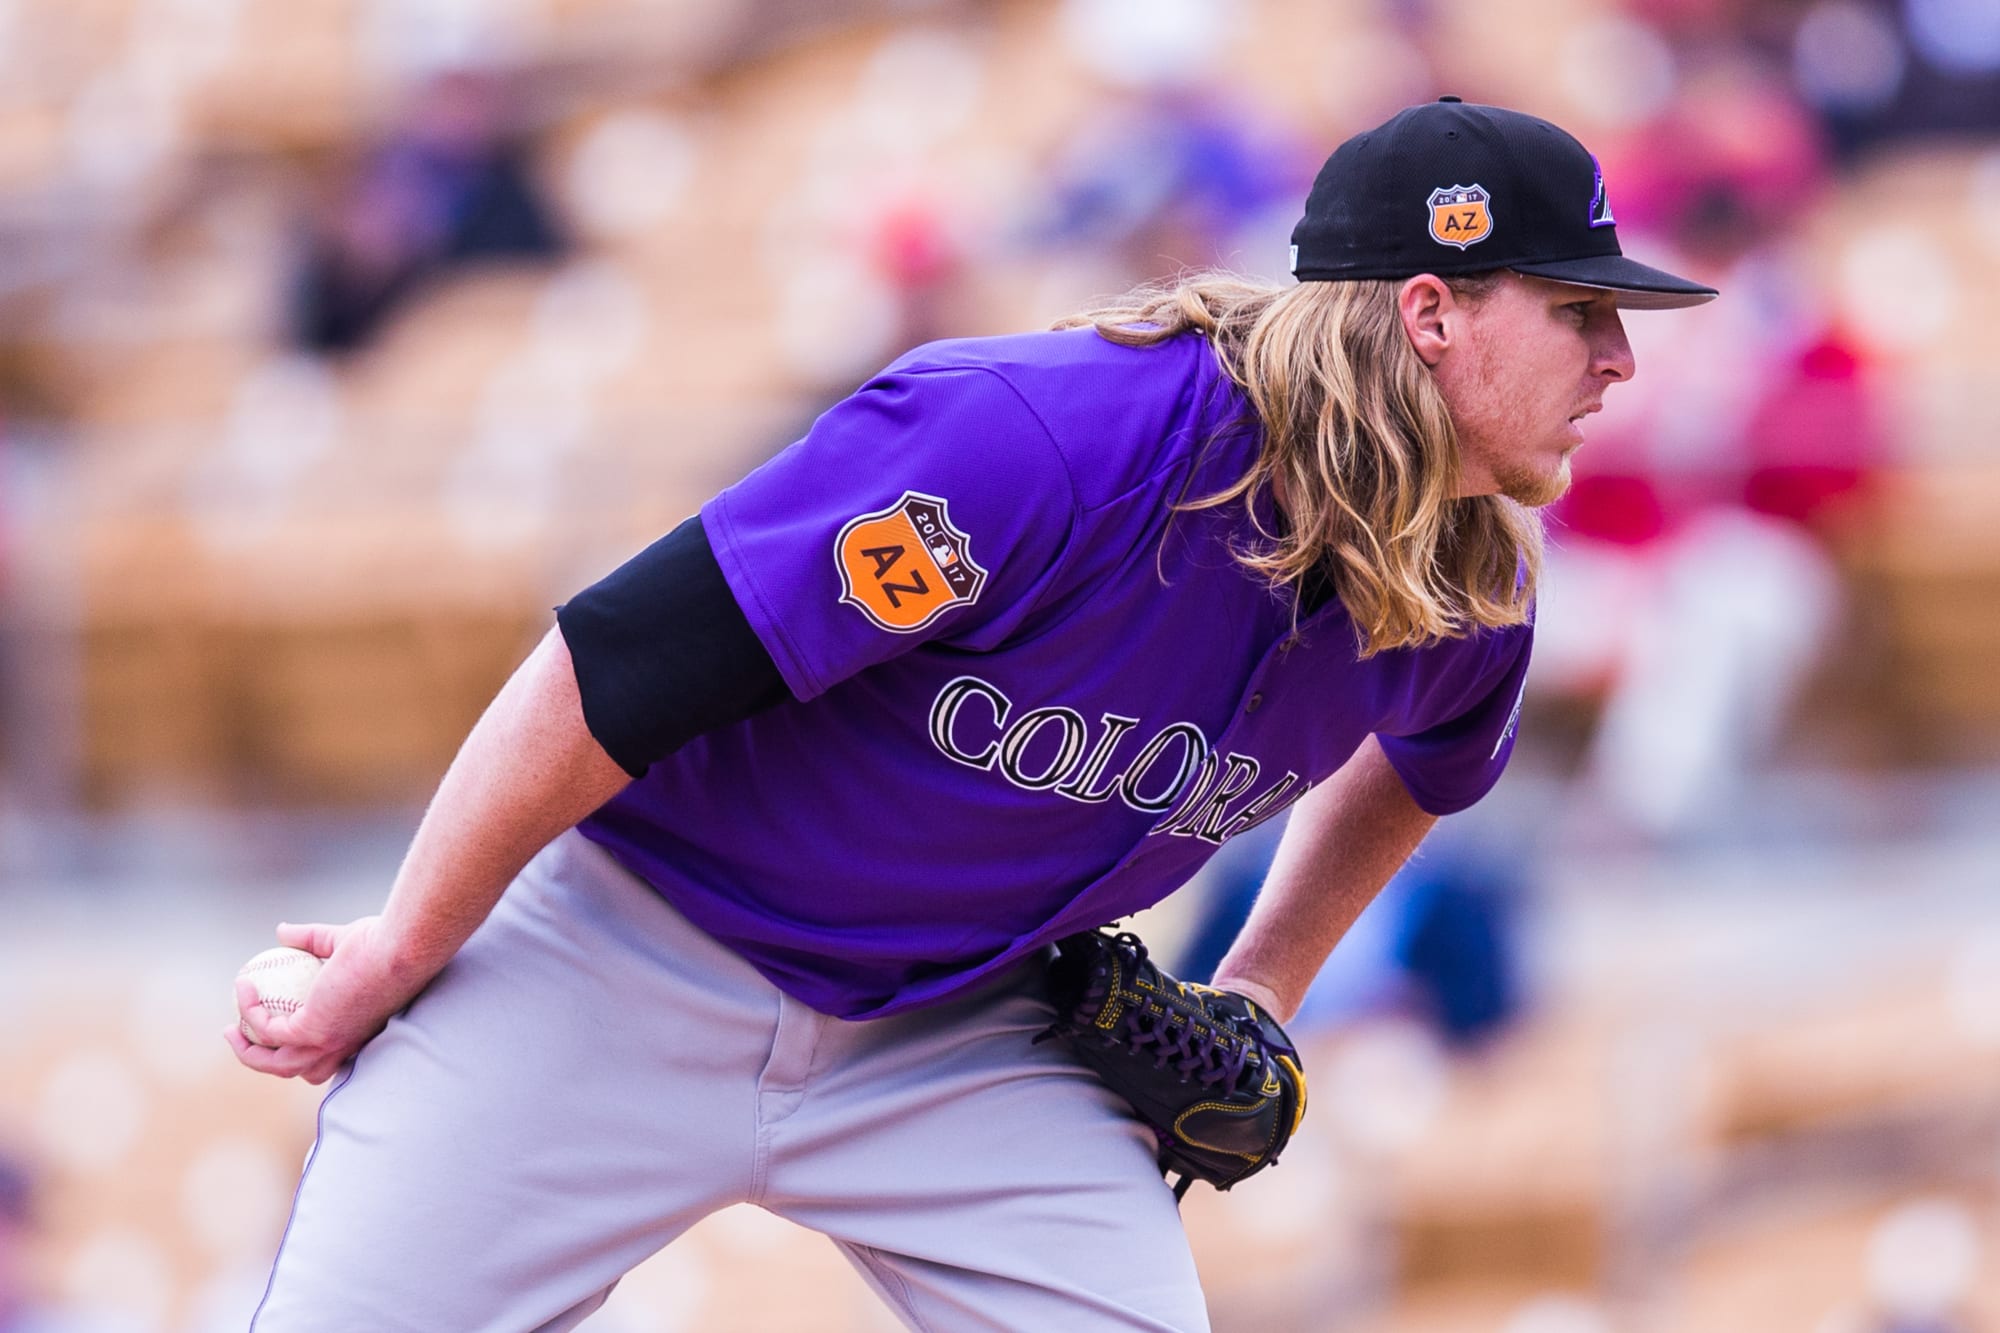 Colorado Rockies: Check out the complete 2018 spring training schedule